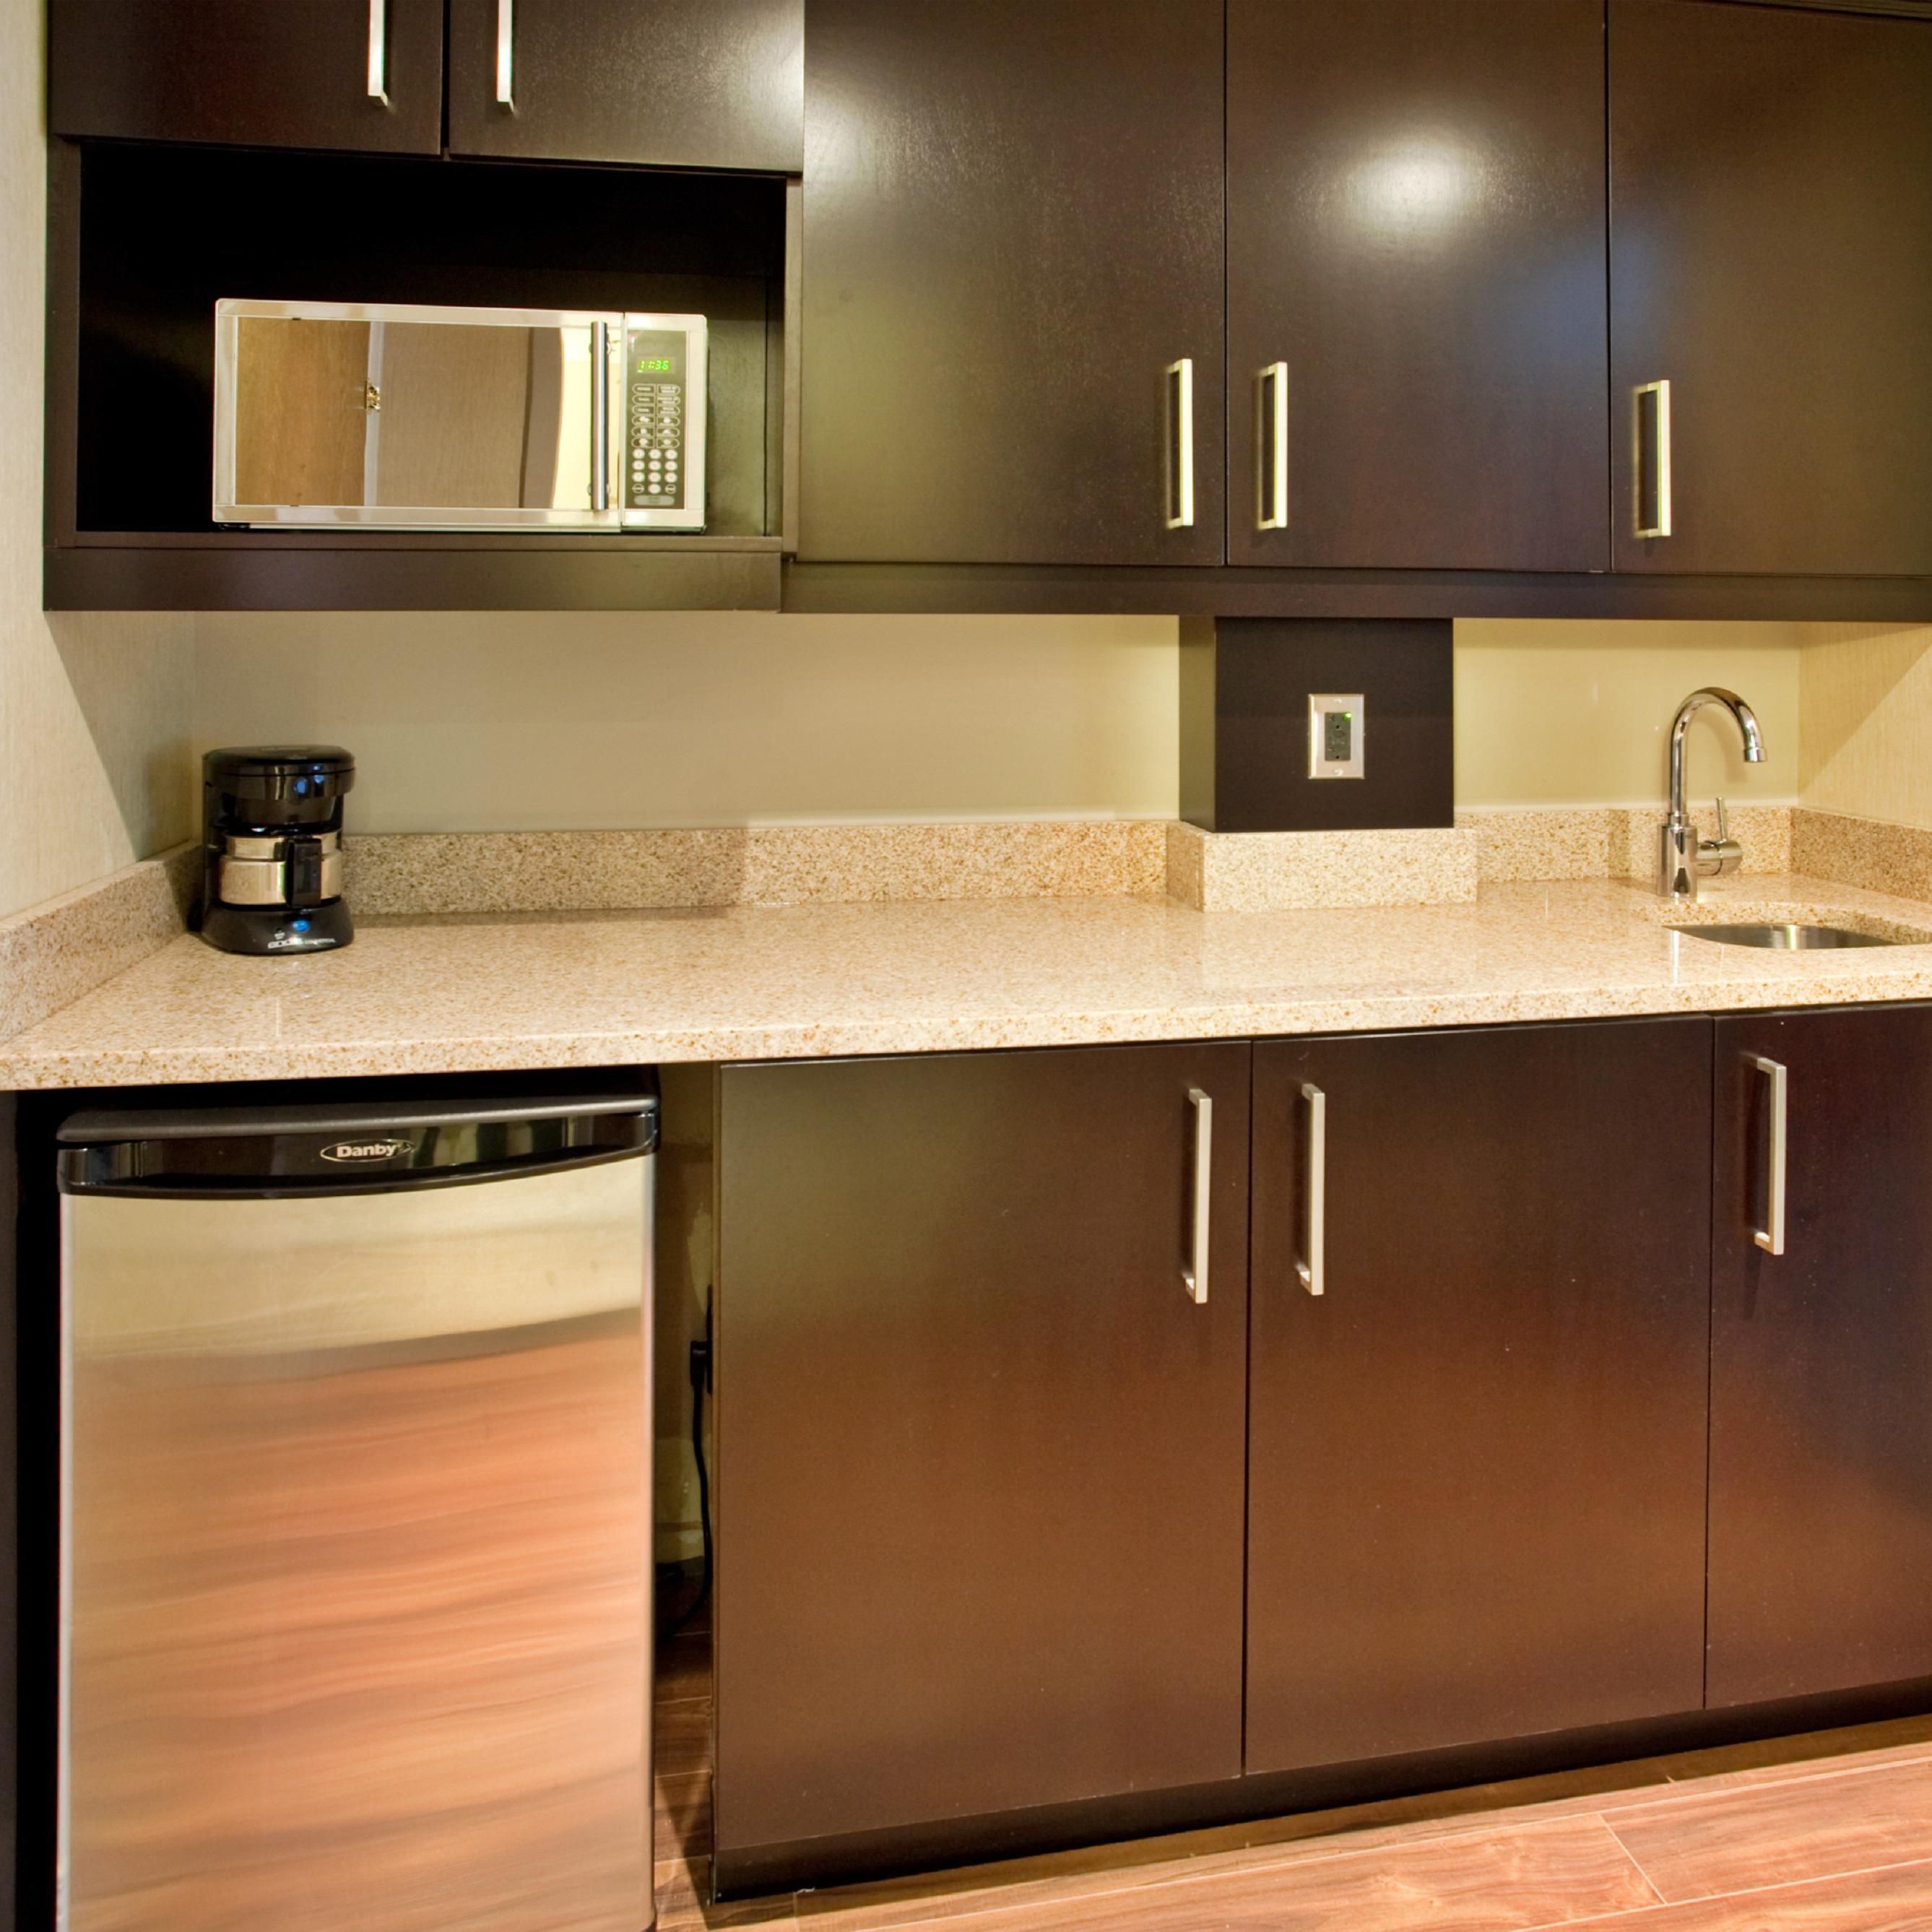 Our executive rooms offer a kitchenette